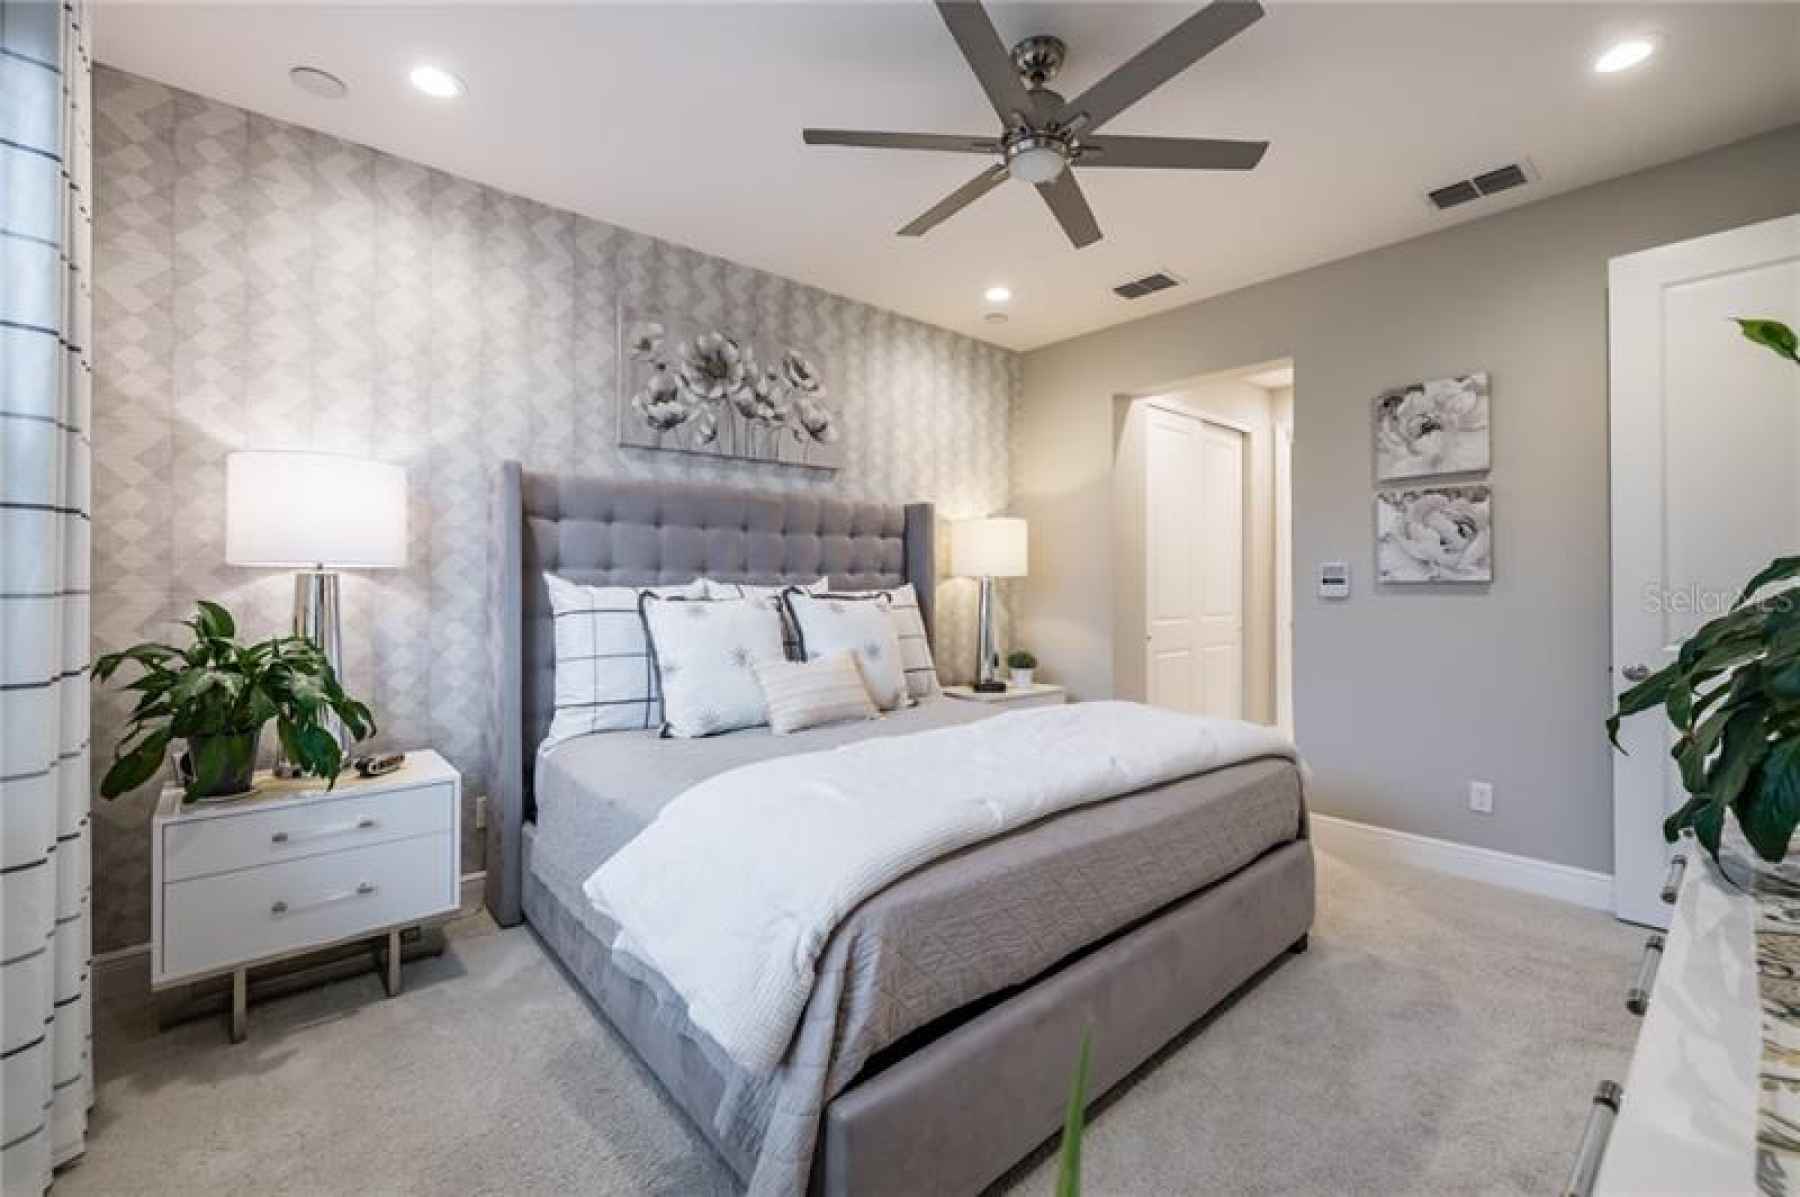 Master Bedroom with Ensuite features 2 walk-in closets and a wonderful Bathroom.